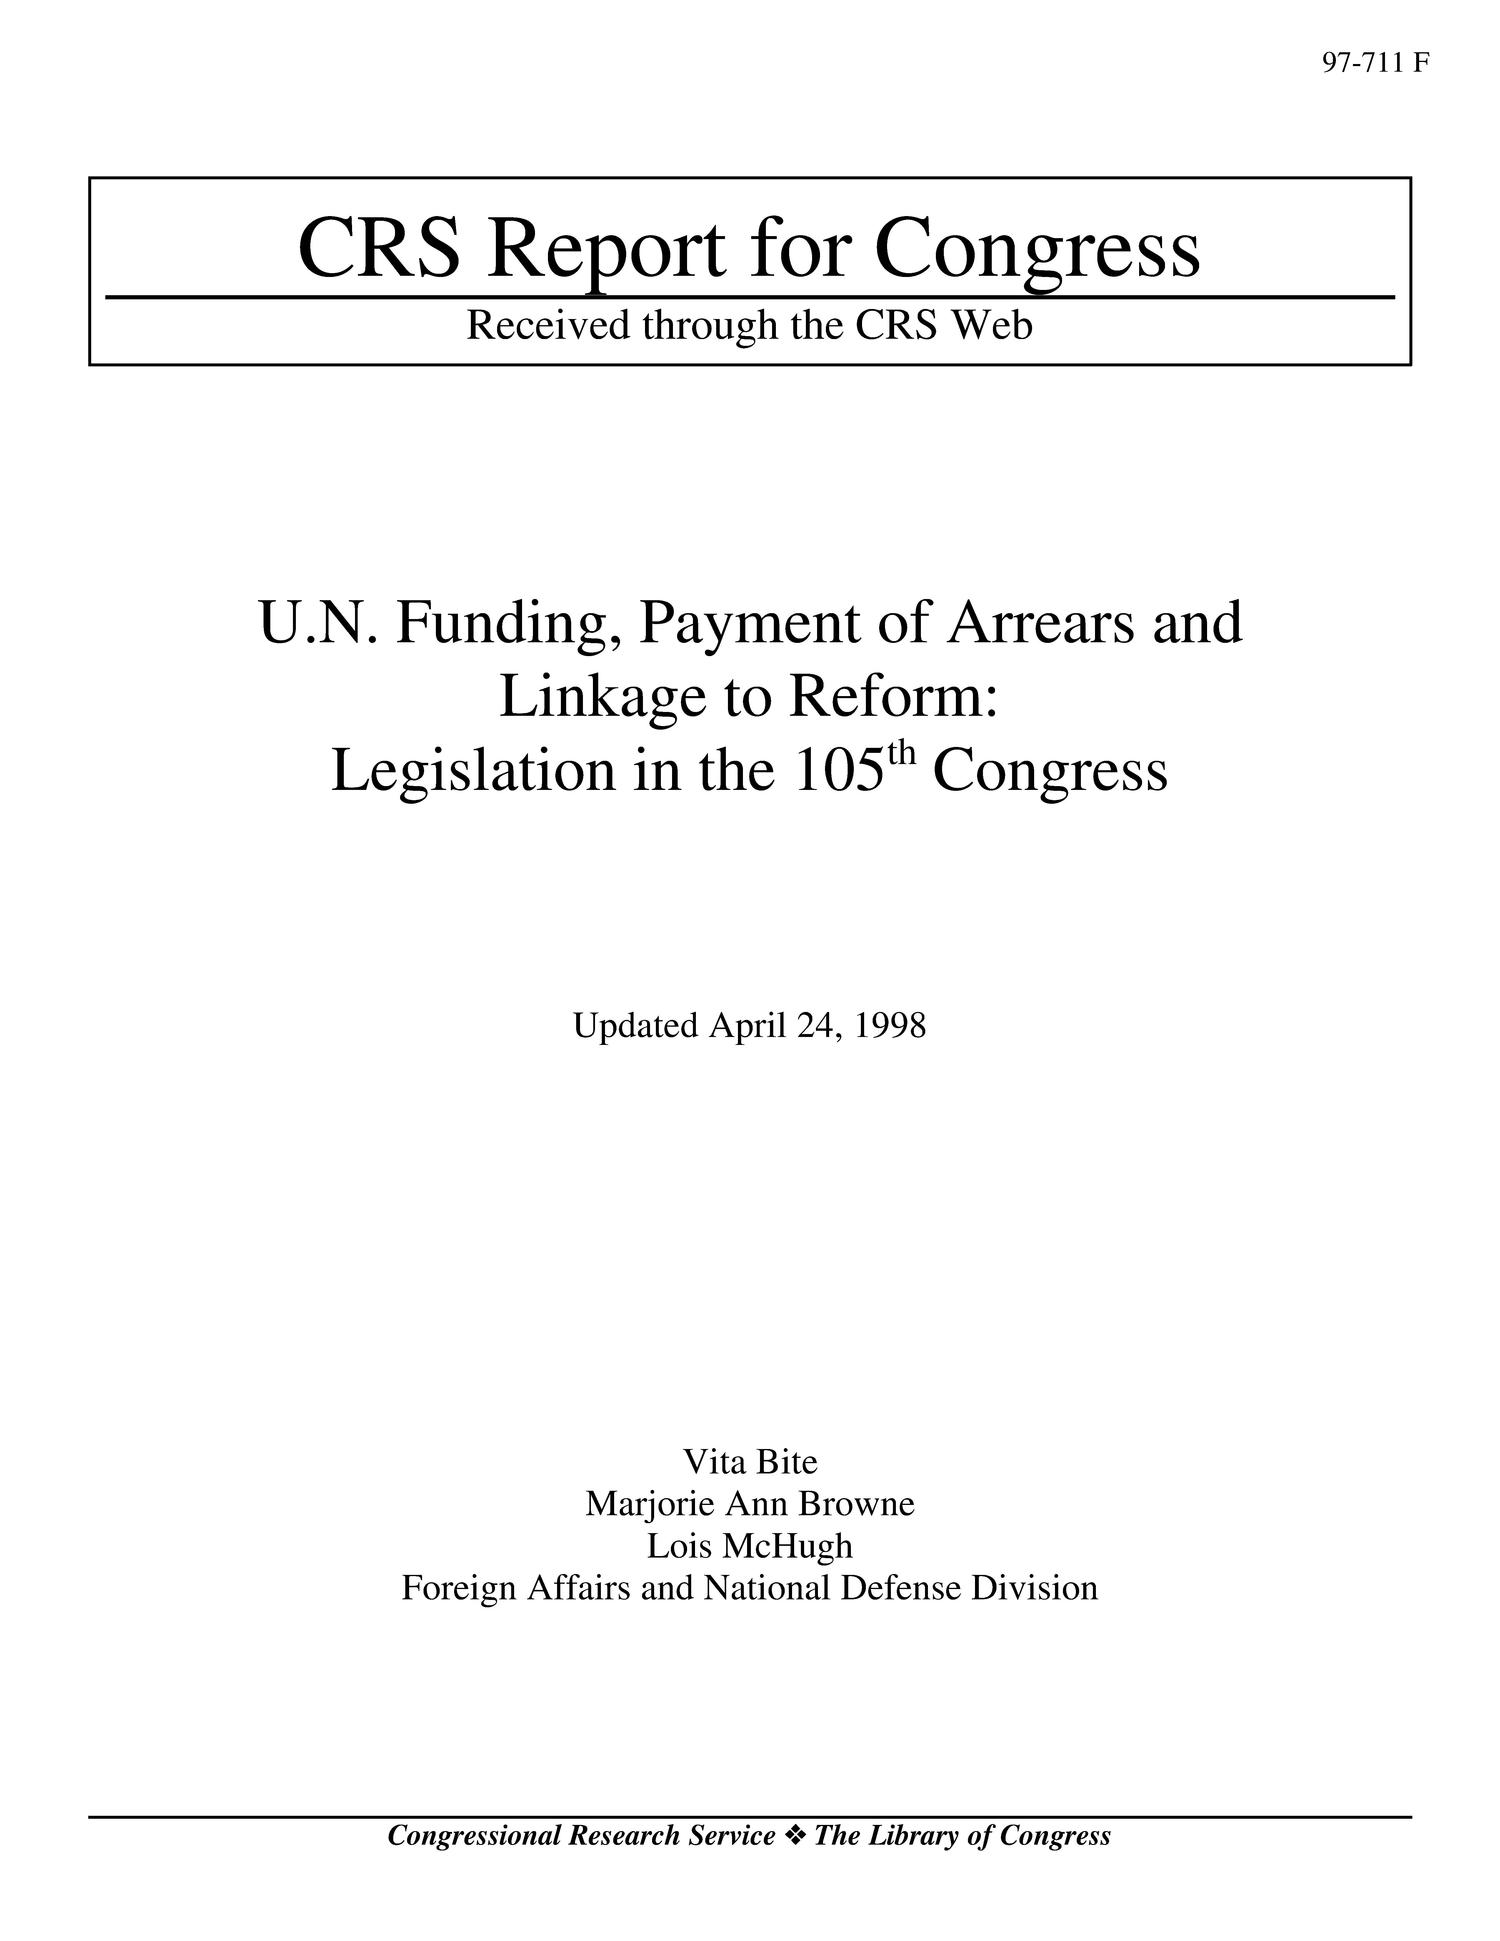 U.N Funding, Payment of Arrears and Linkage to Reform: Legislation in the 105th Congress
                                                
                                                    [Sequence #]: 1 of 20
                                                